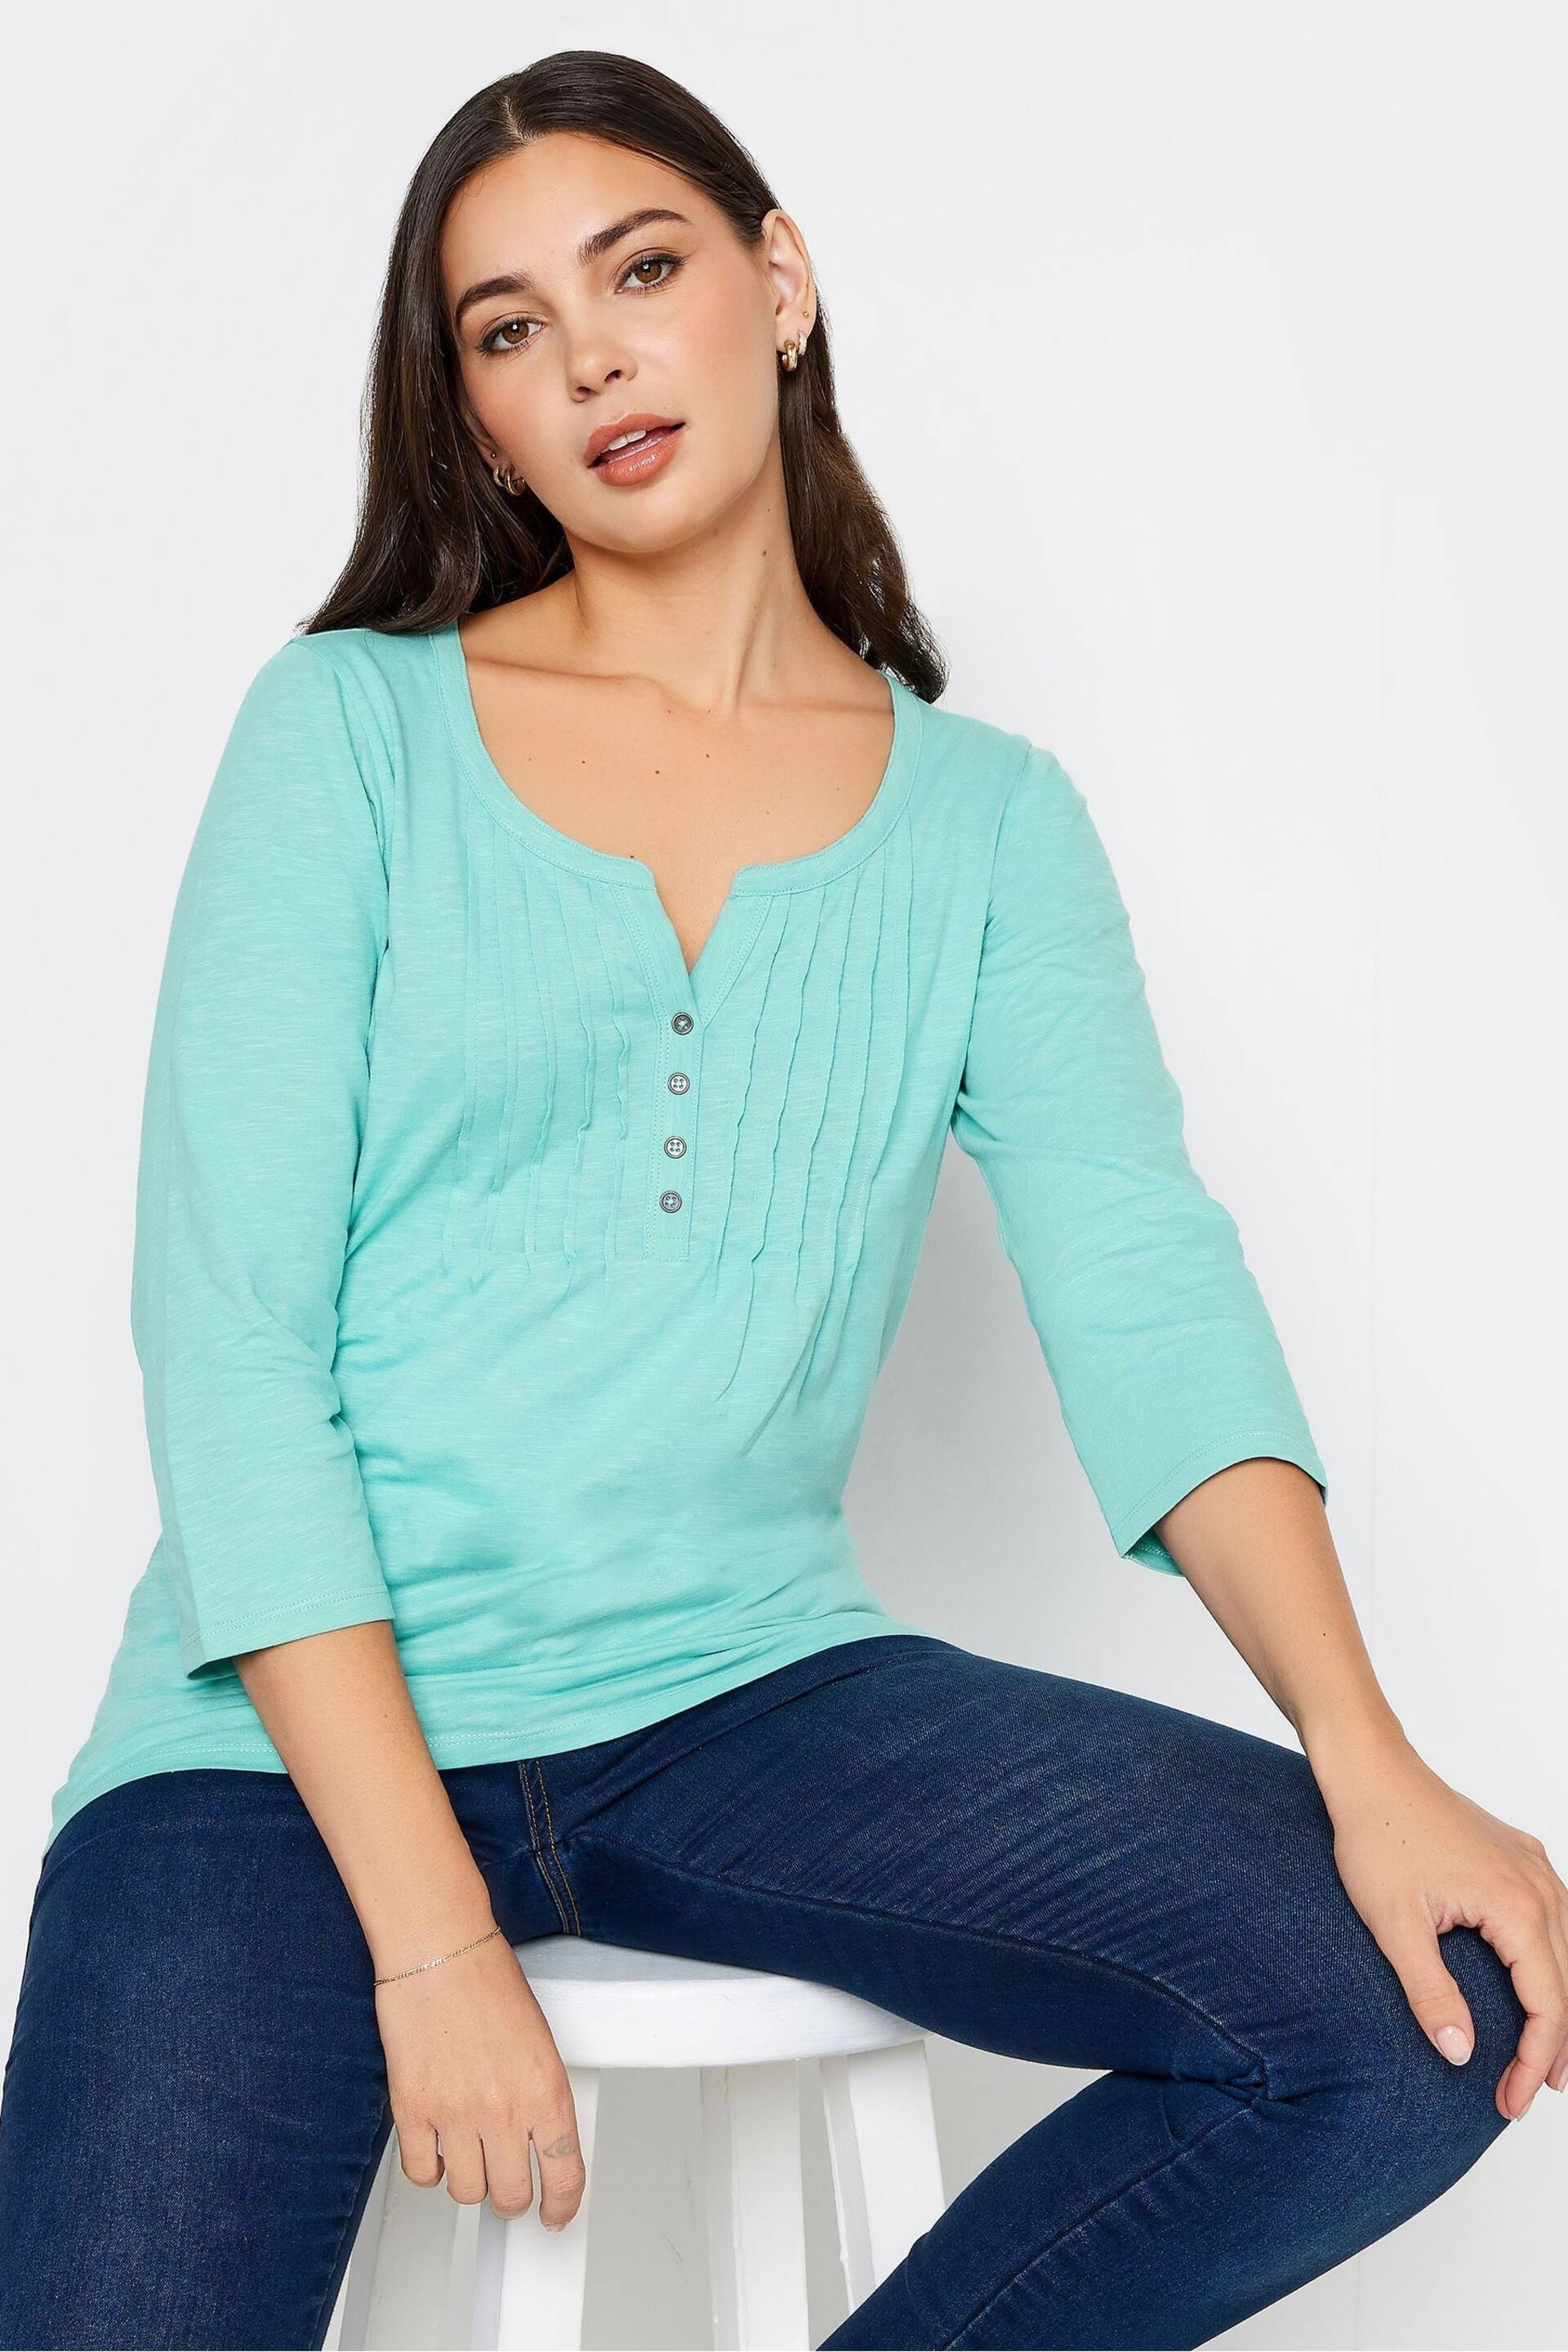 Long Tall Sally Turquoise Henley Top - Image 1 of 4